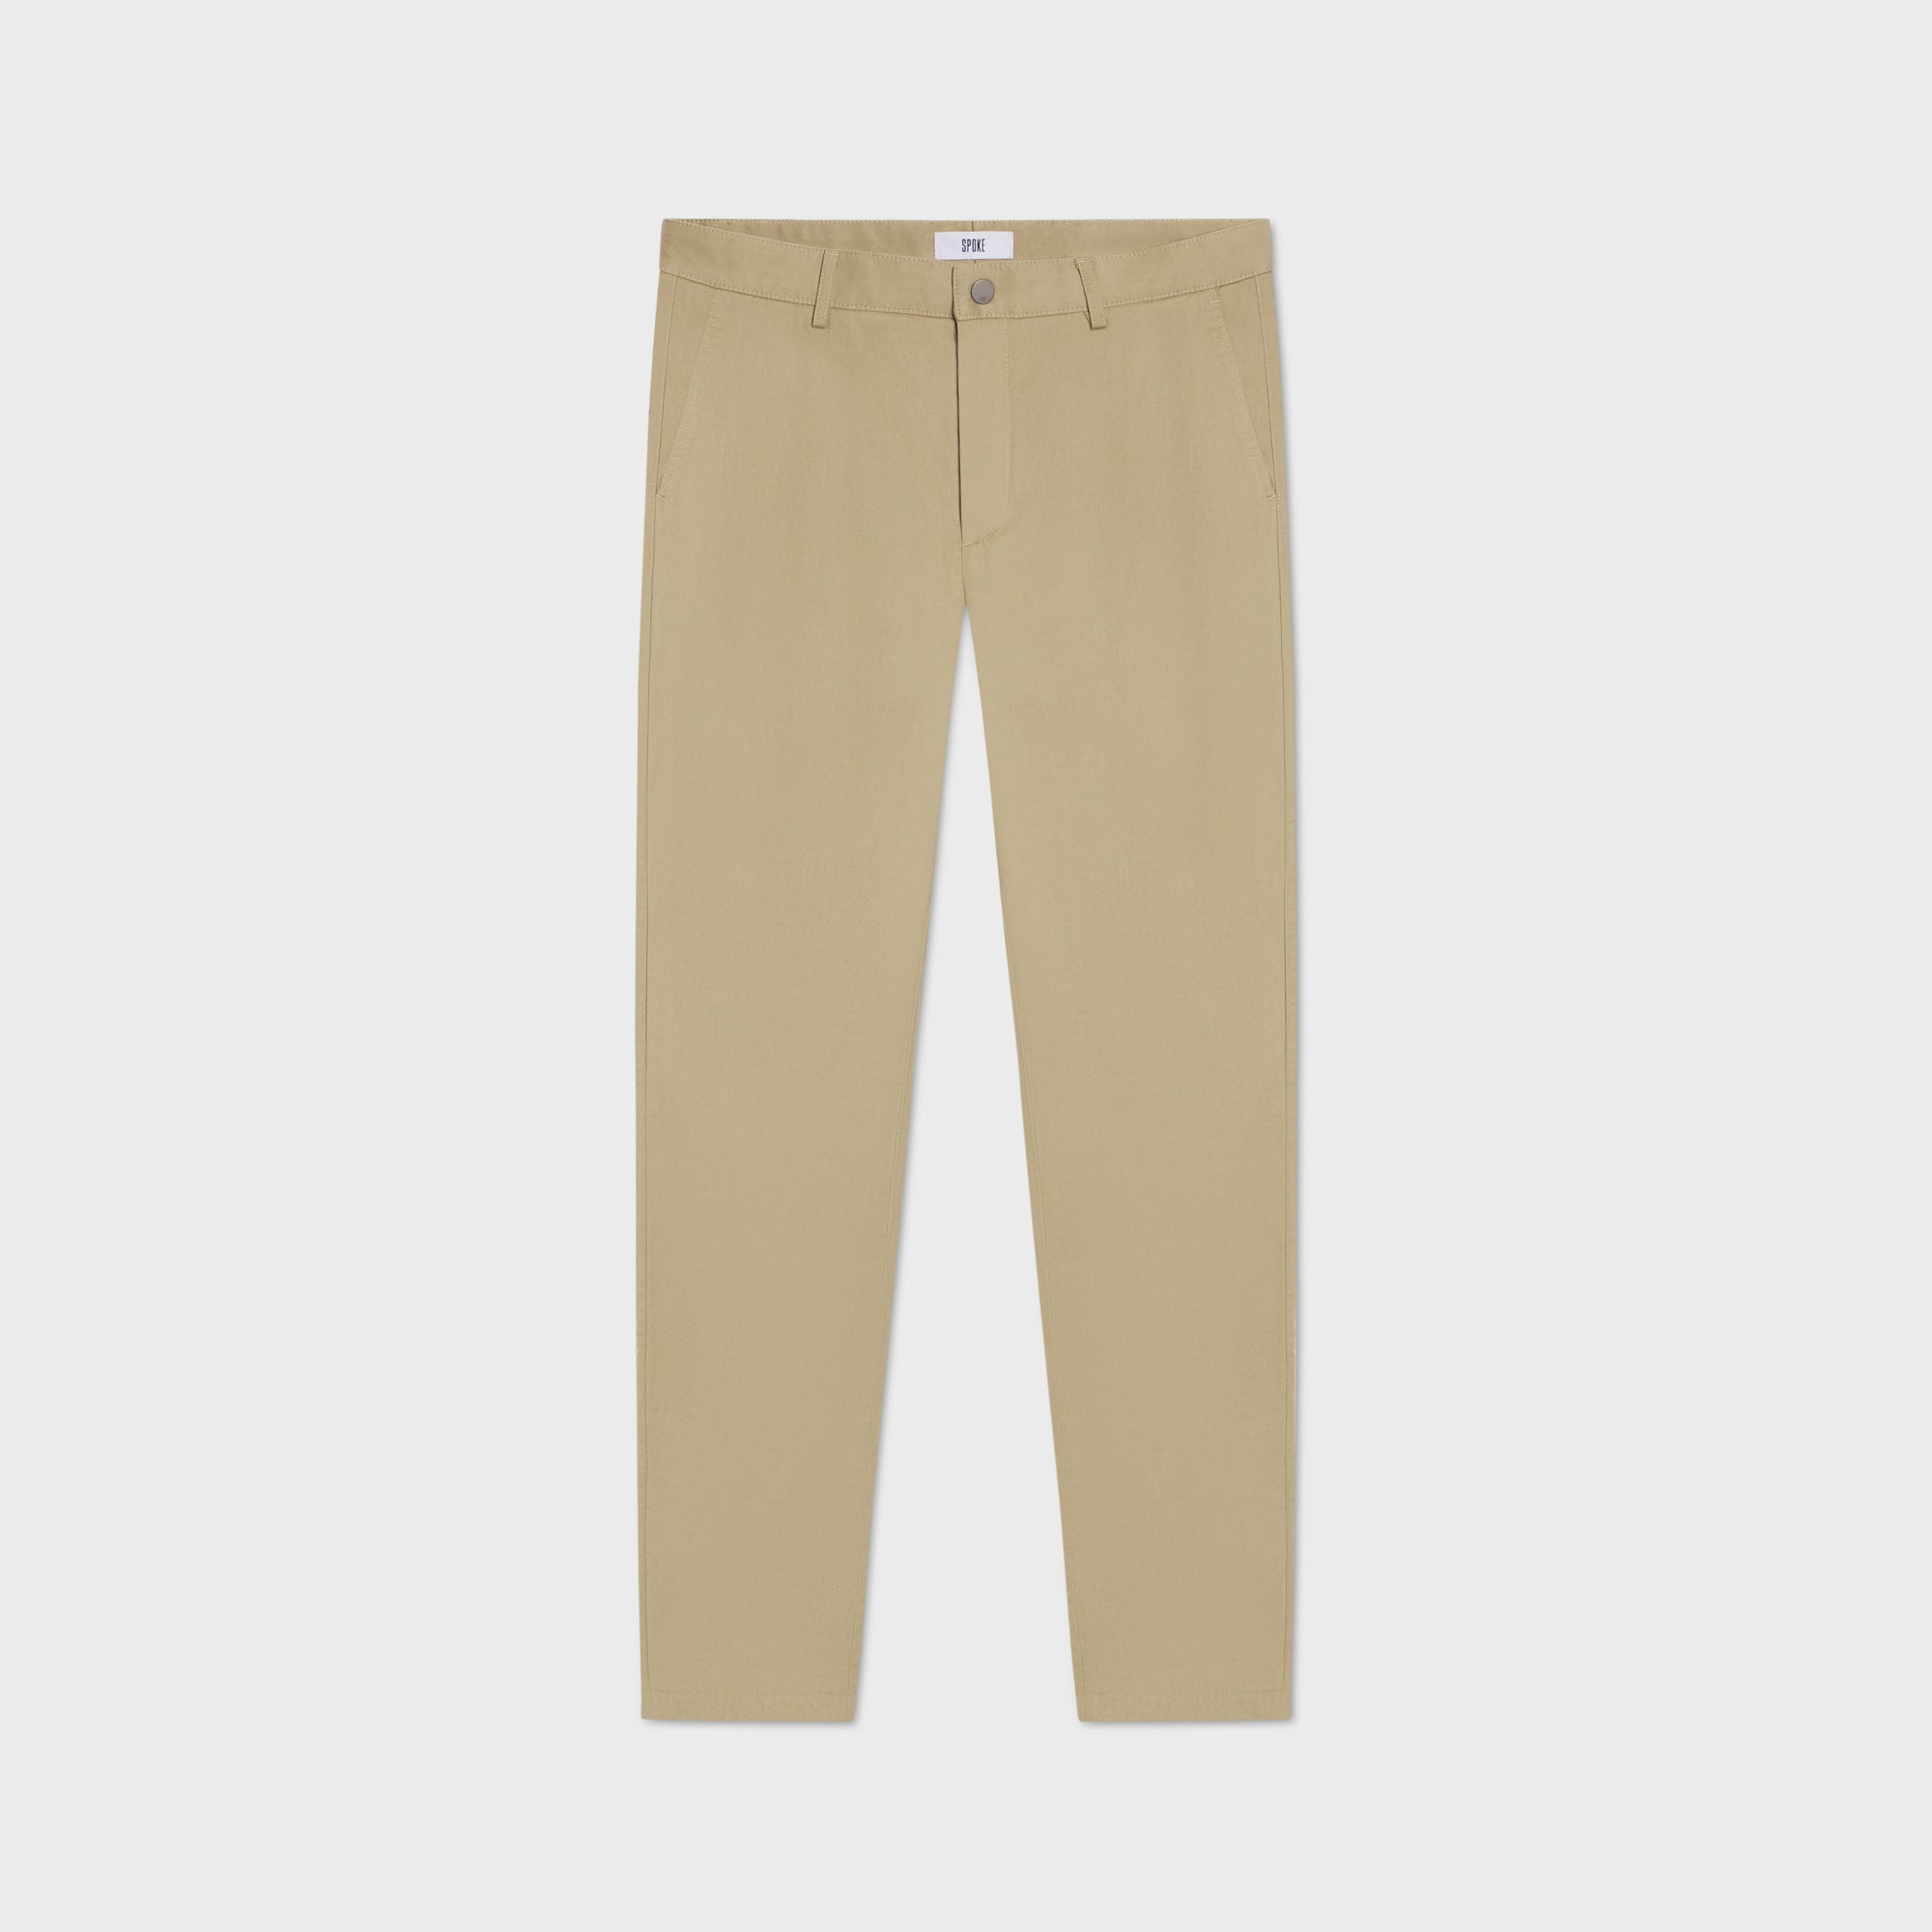 Light Taupe Winter Chino Cotton Blend Pants FW23 28250600 | Zegna SE